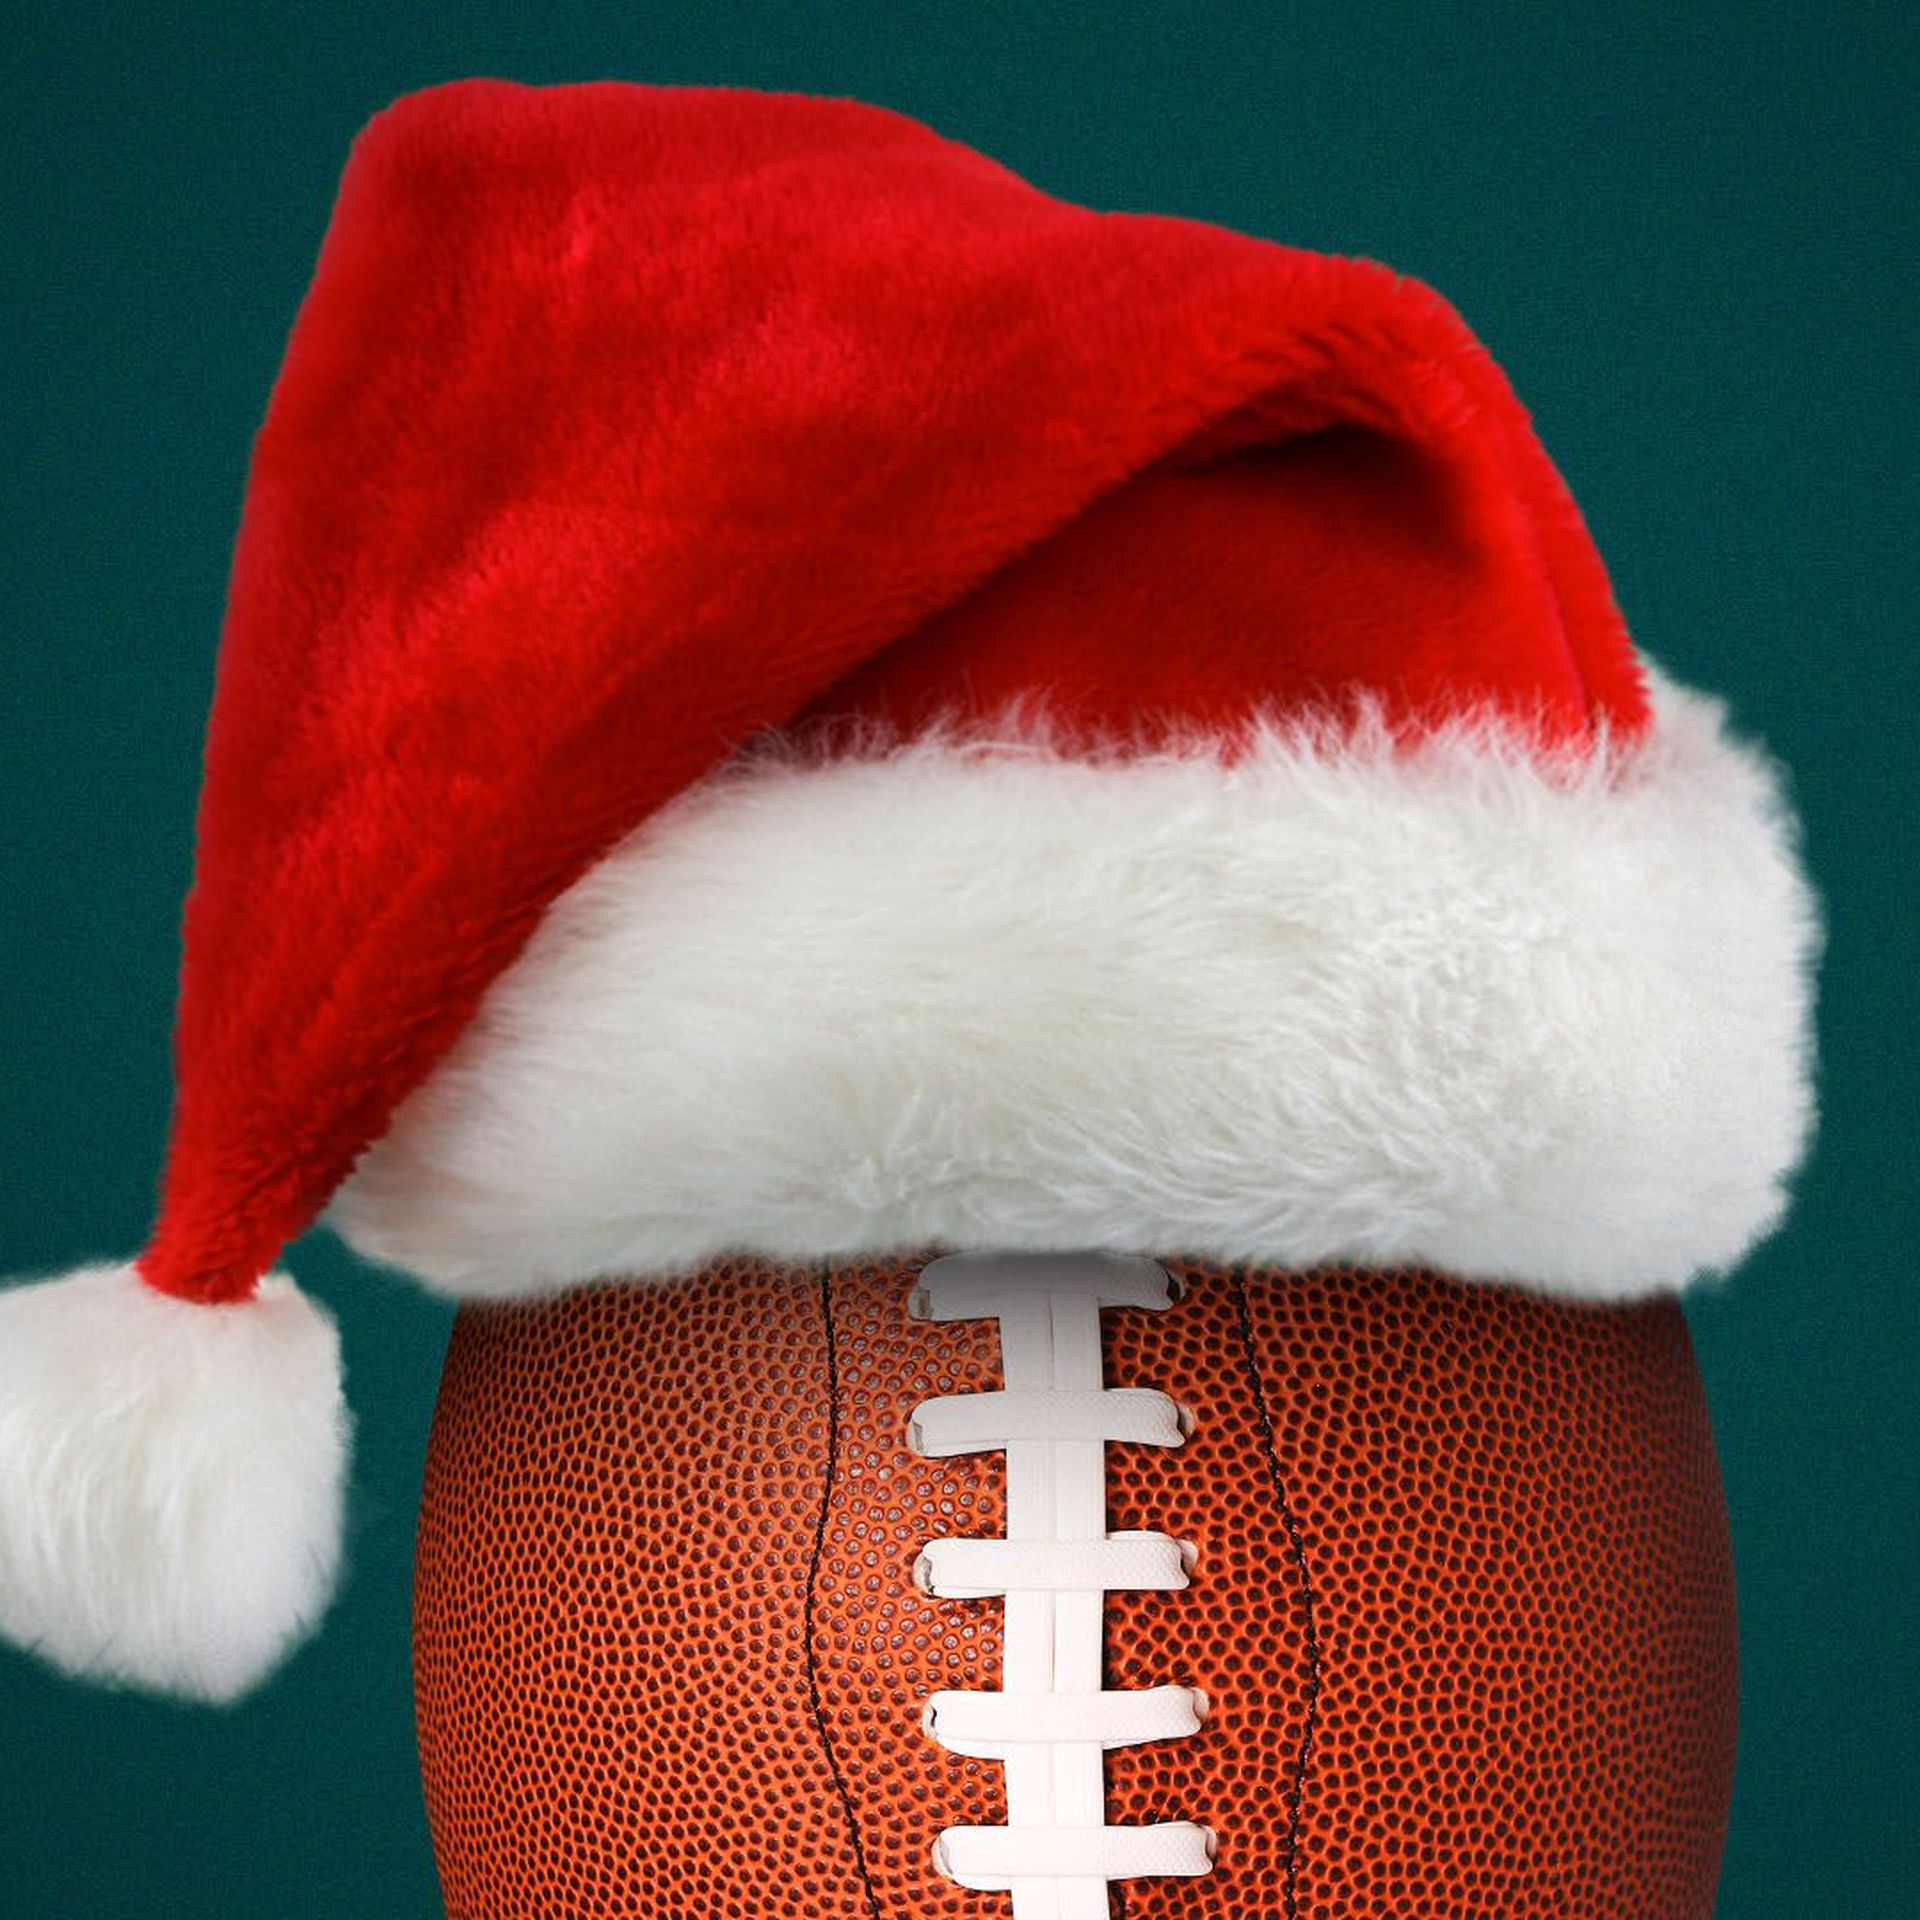 The NFL is taking over Christmas